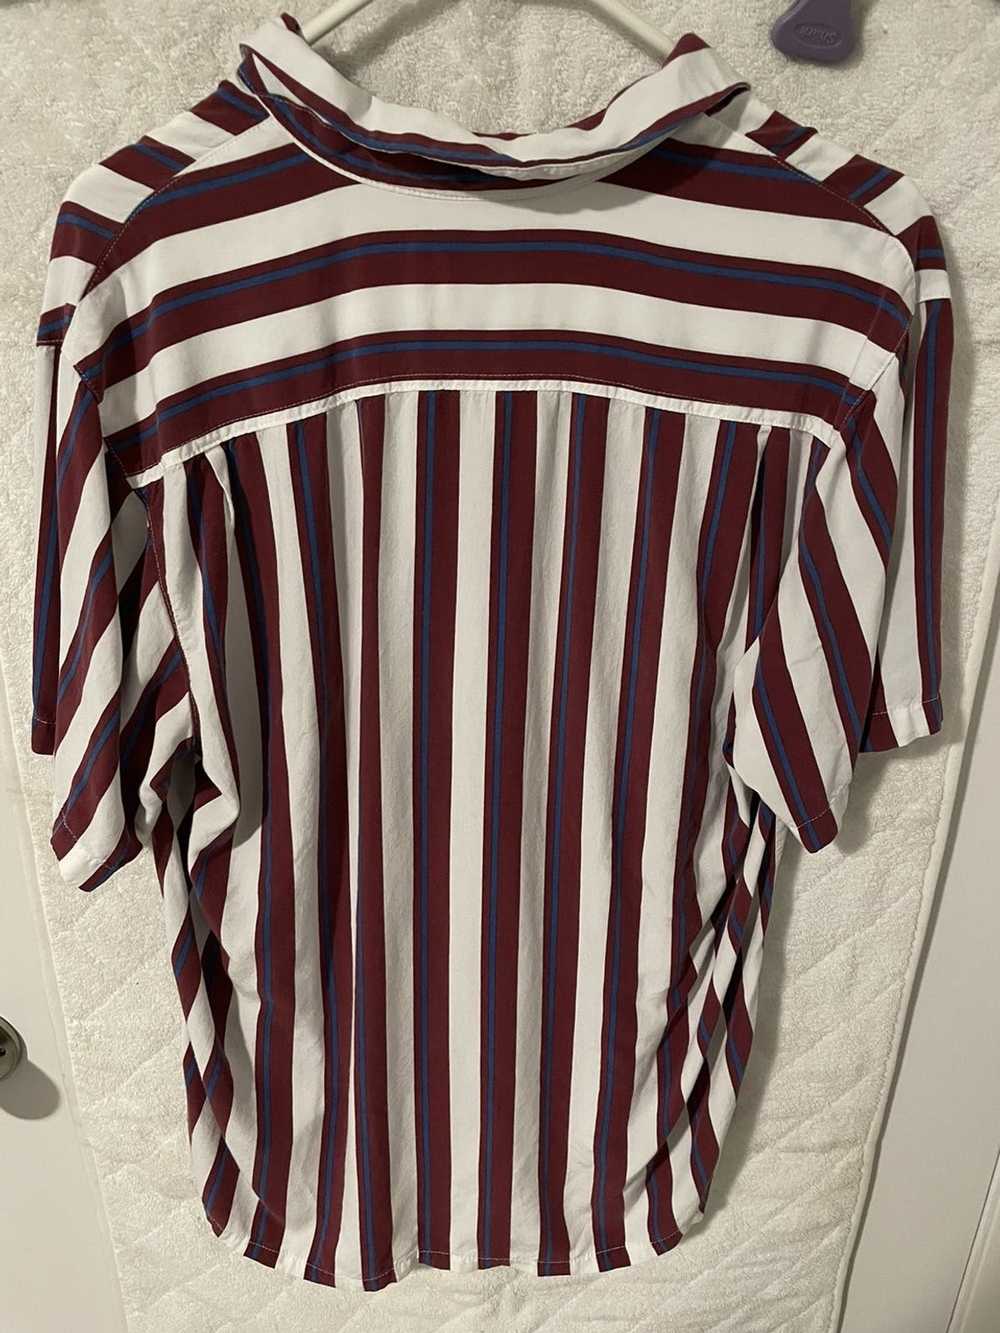 Urban Outfitters Striped Bowler shirt - image 3